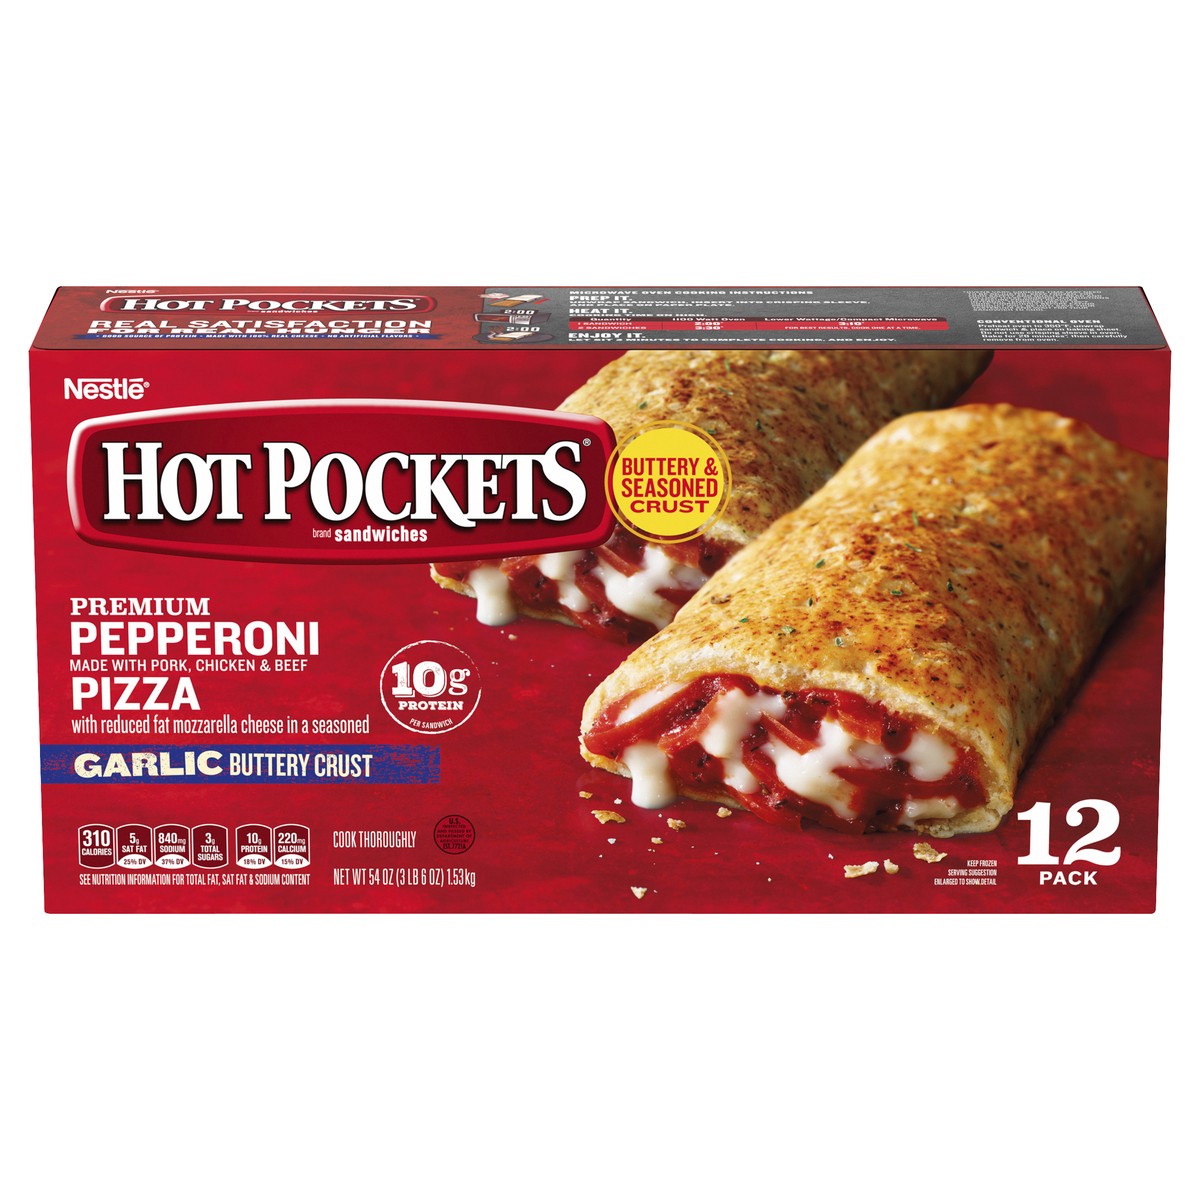 slide 1 of 8, Hot Pockets Pepperoni Pizza Garlic Buttery Crust Frozen Snacks, Pizza Snacks Made with Reduced Fat Mozzarella Cheese, 12 Count Frozen Sandwiches, 54 oz